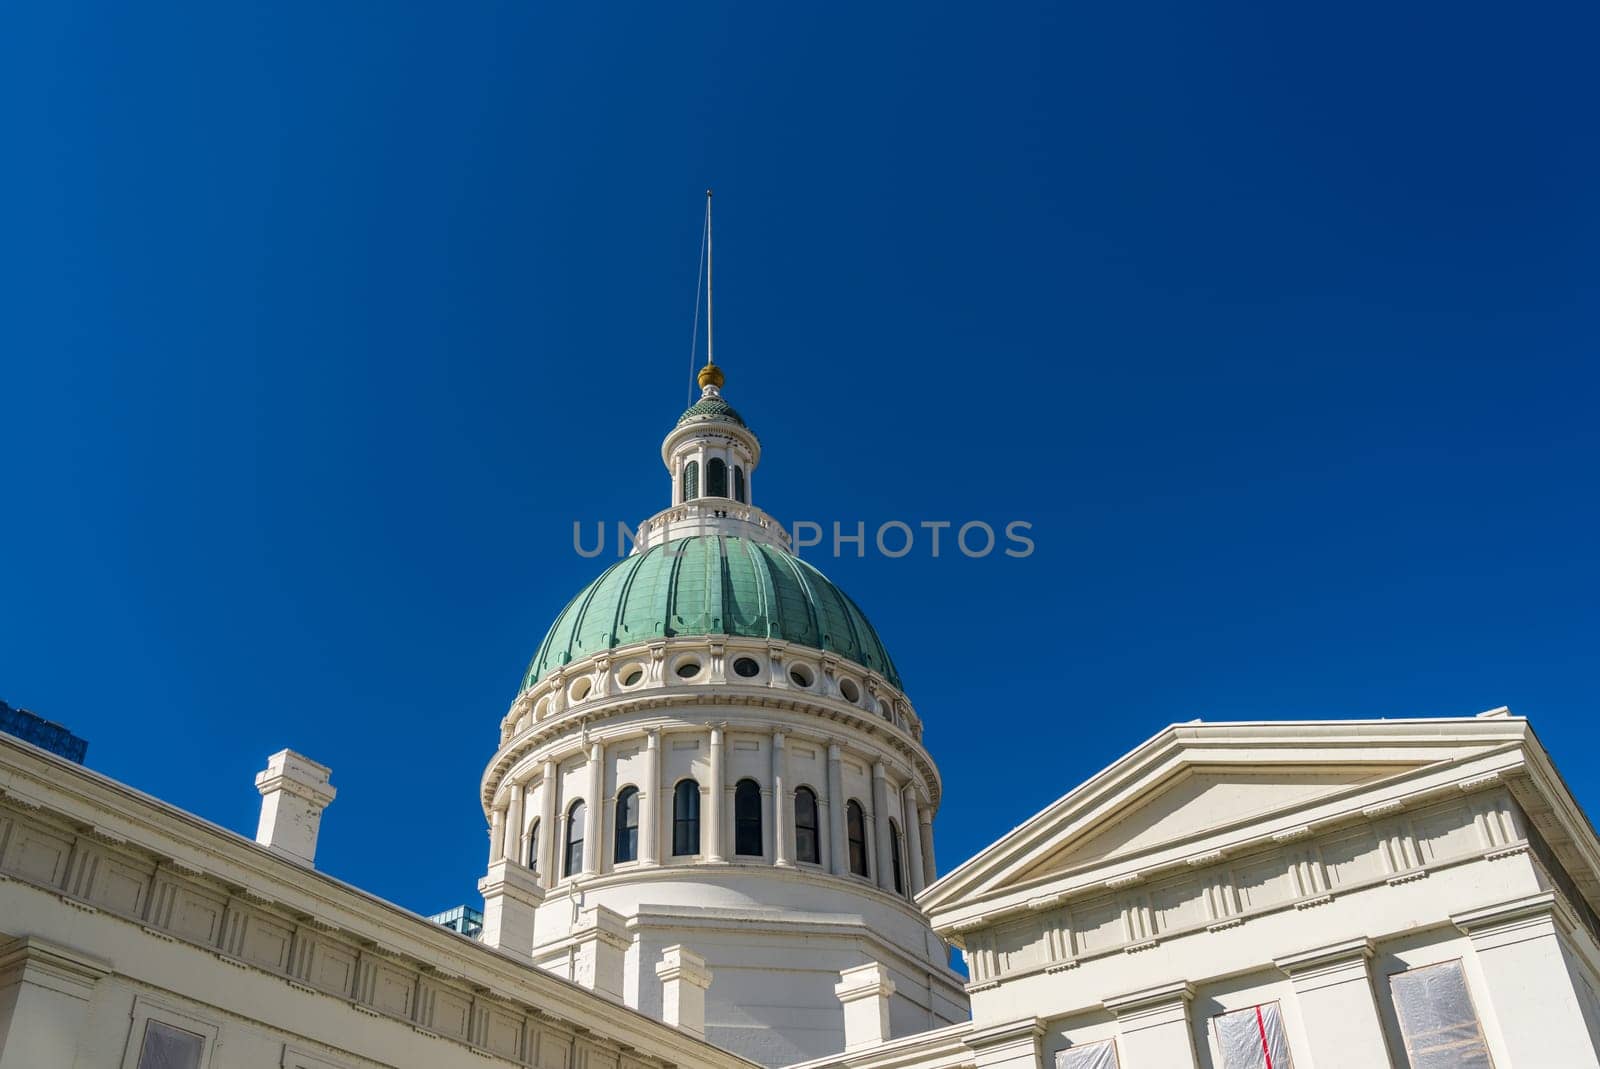 Dome of Old Courthouse in St Louis Missouri against blue sky by steheap